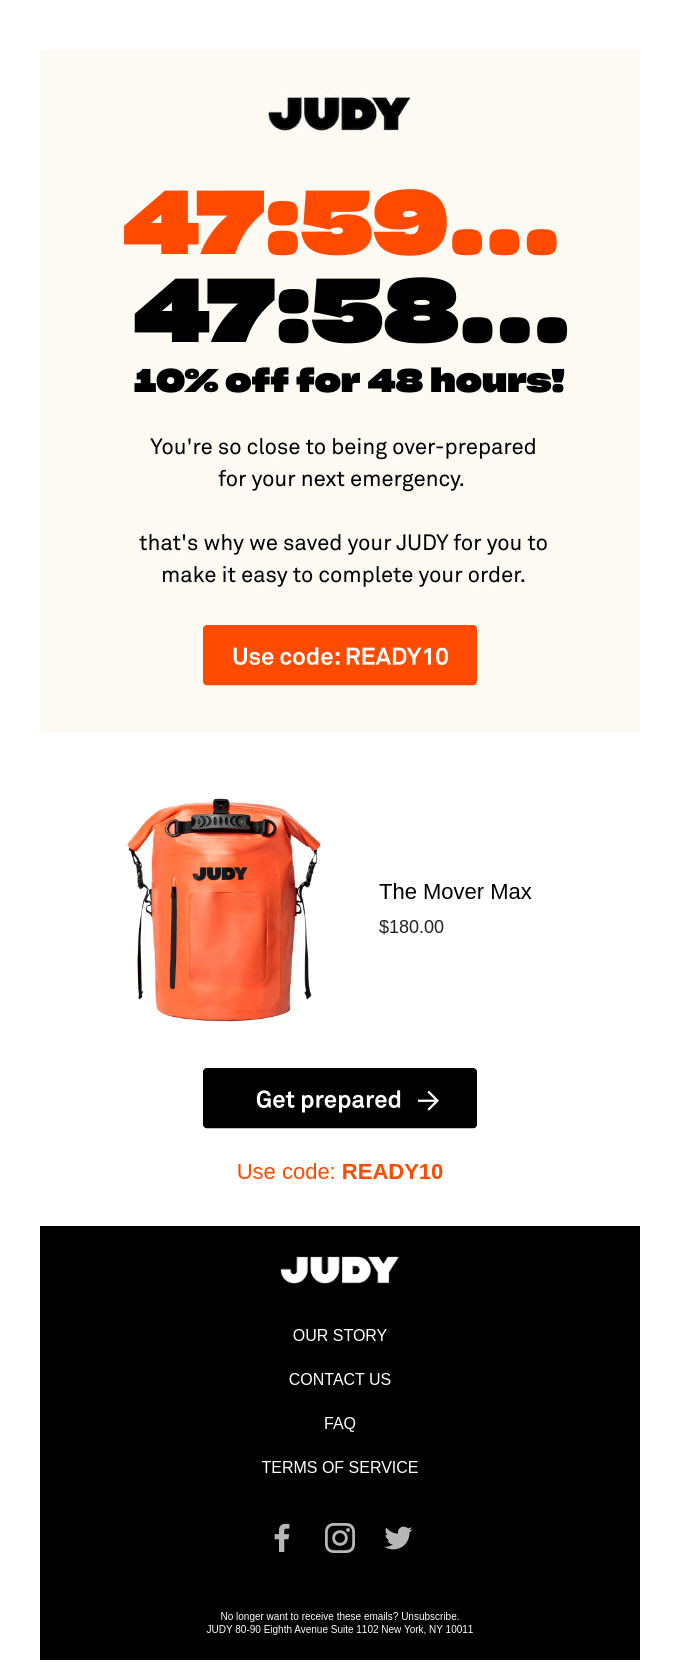 Judy email marketing campaign offering 10% off a purchase for 48 hours.